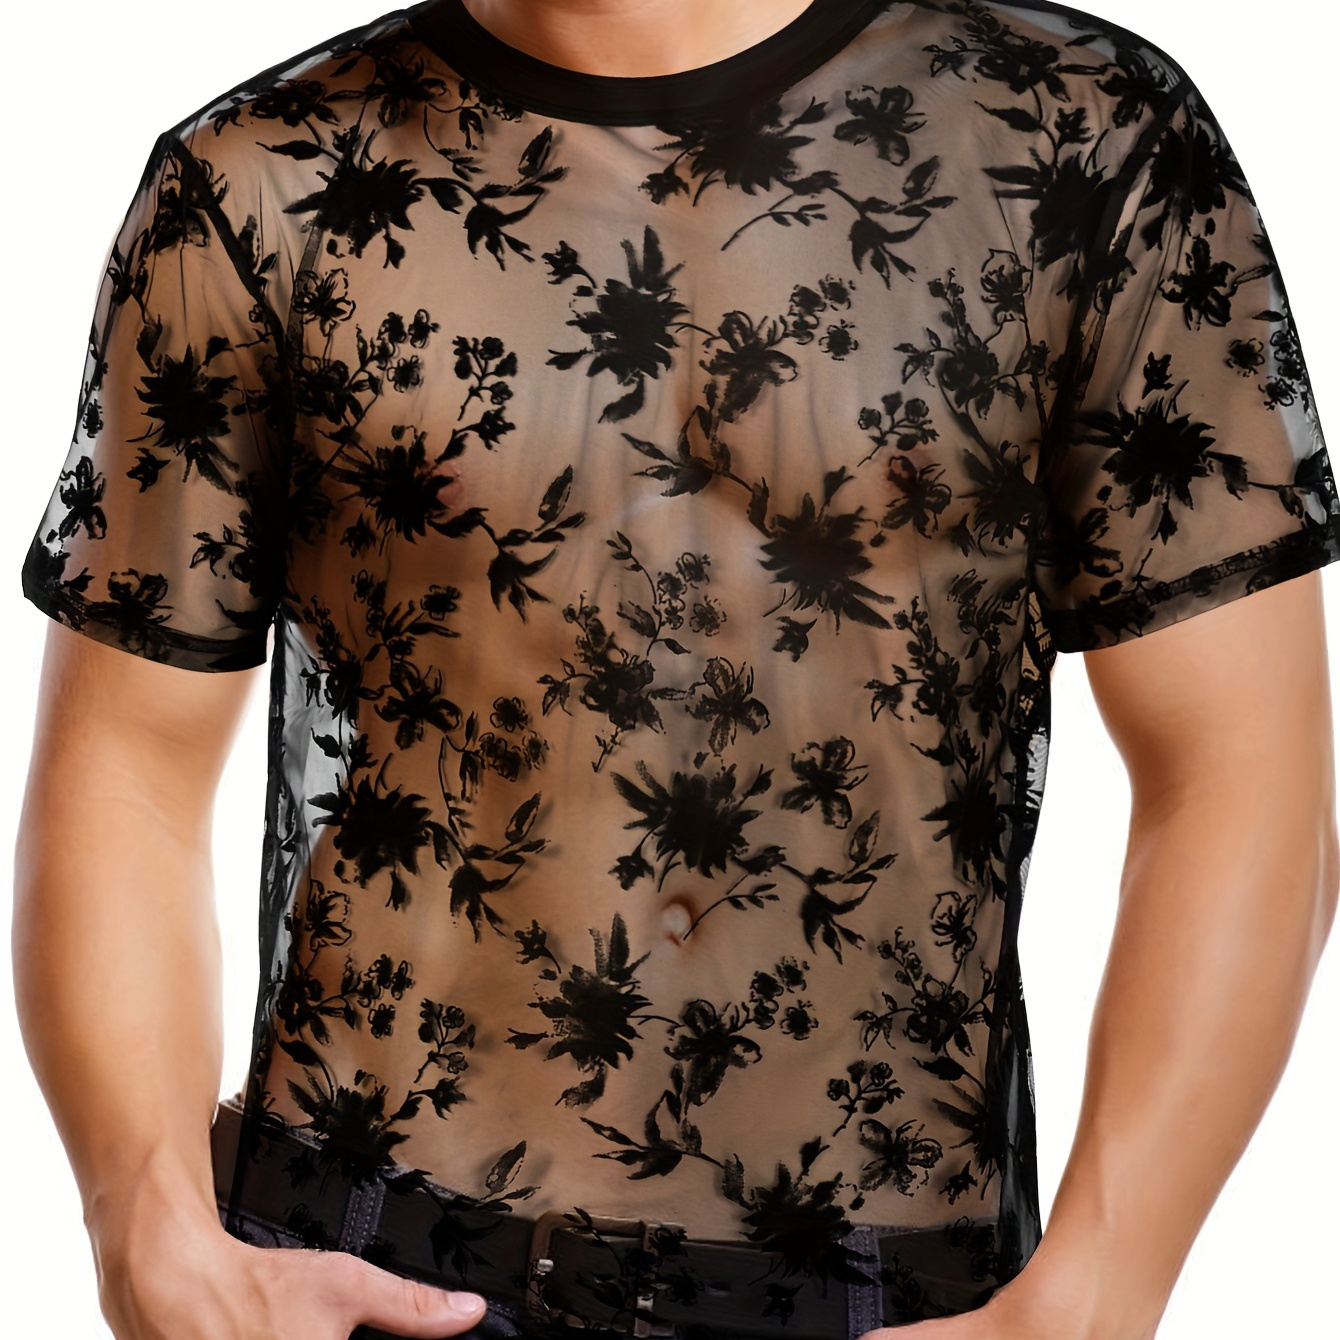 

Floral Pattern T-shirt With Crew Neck, Short Sleeve And See-through Fabric, Stylish And Fashionable Tops For Men's Summer Party And Night Club Wear